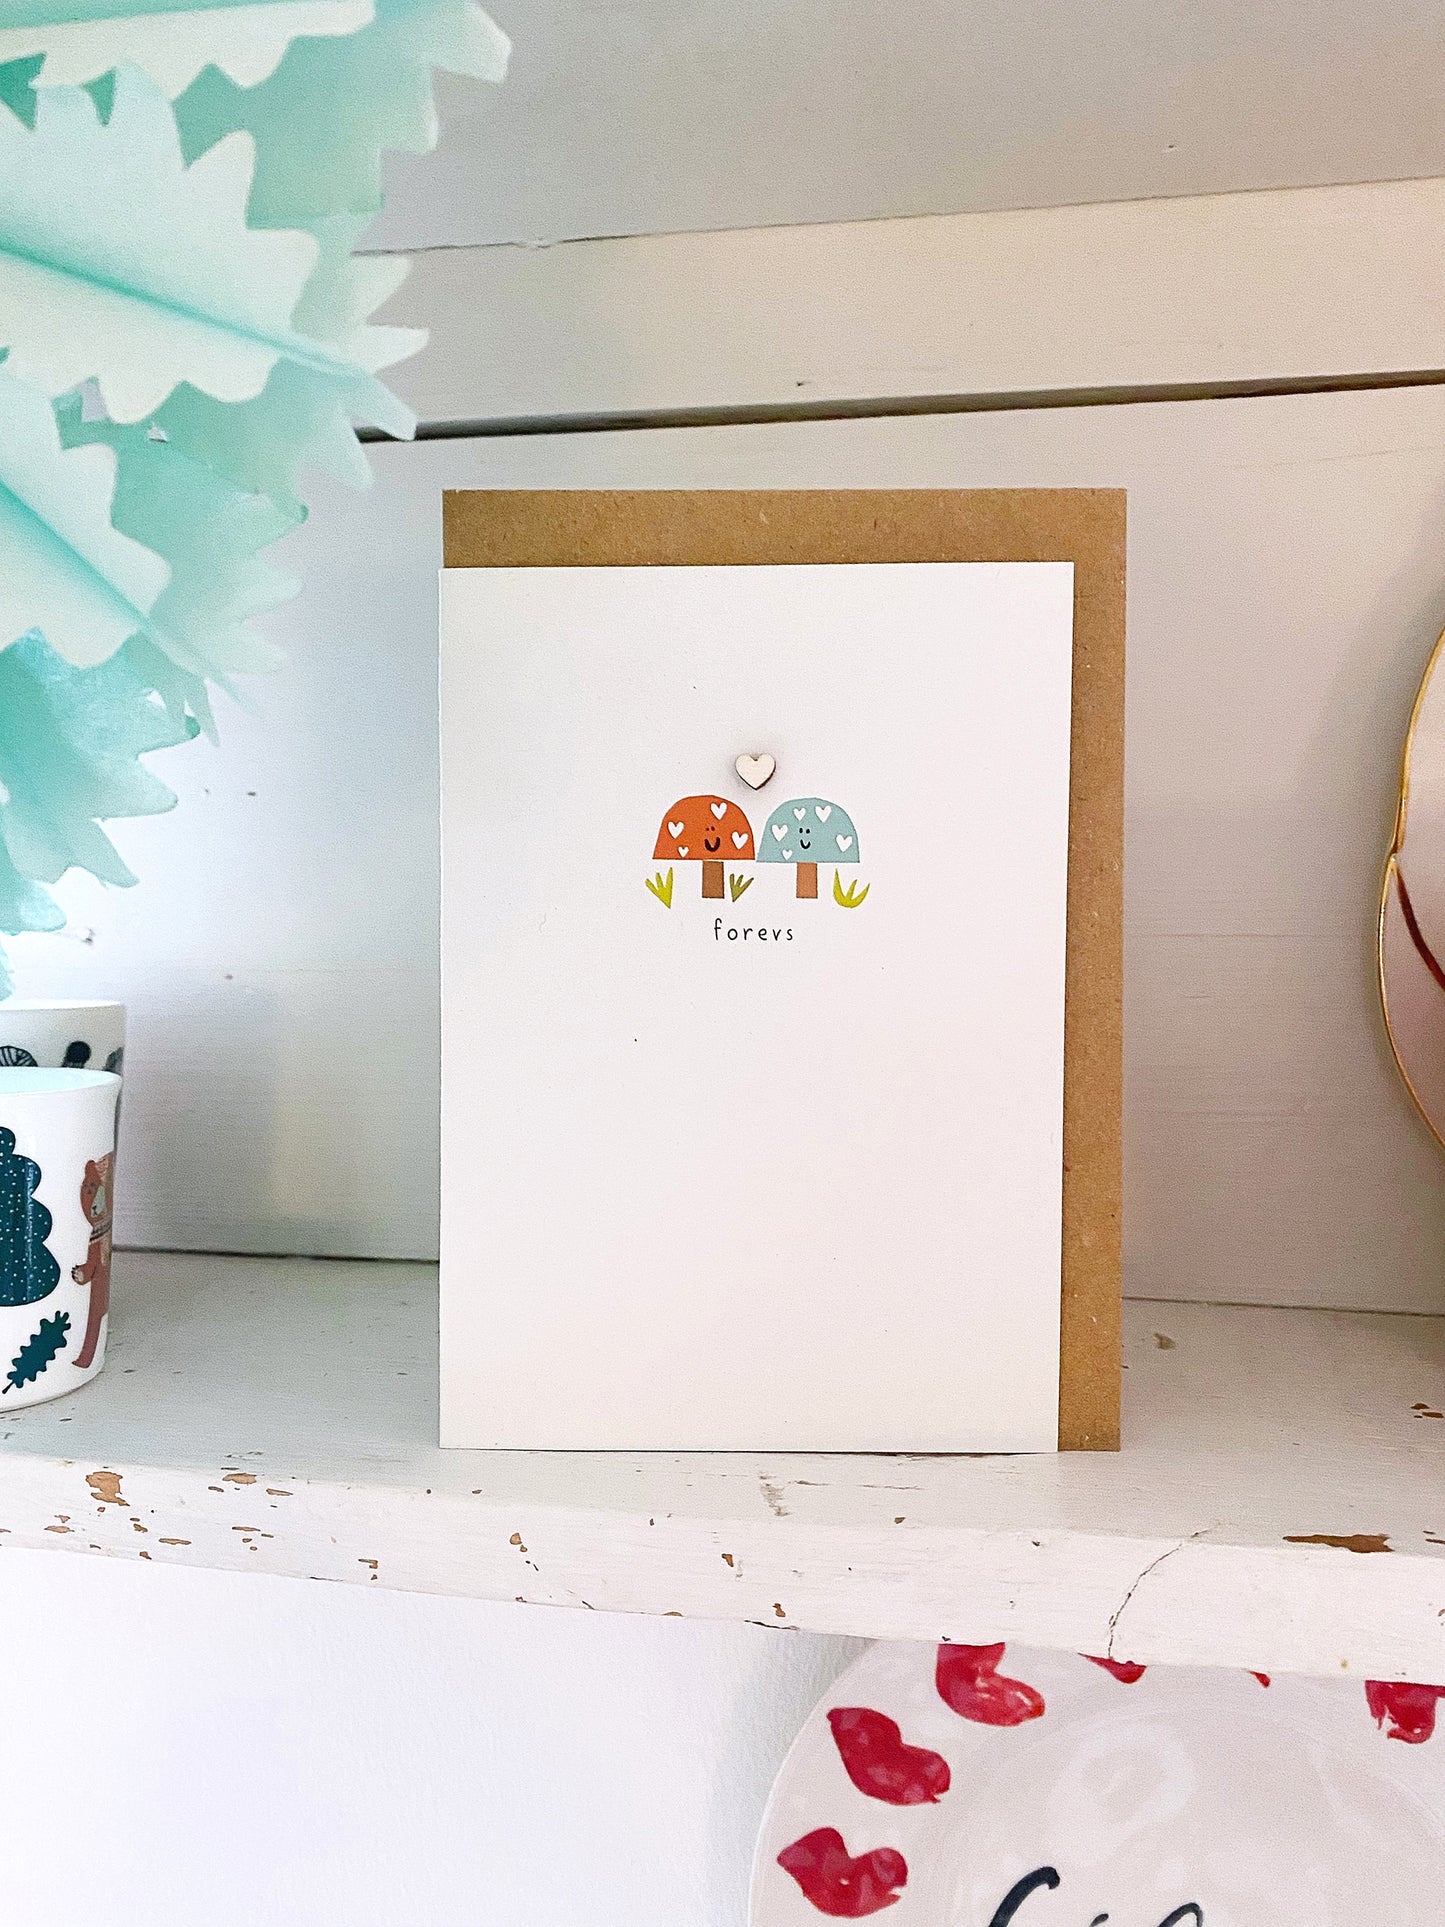 Valentine love forevs toadstool greeting card